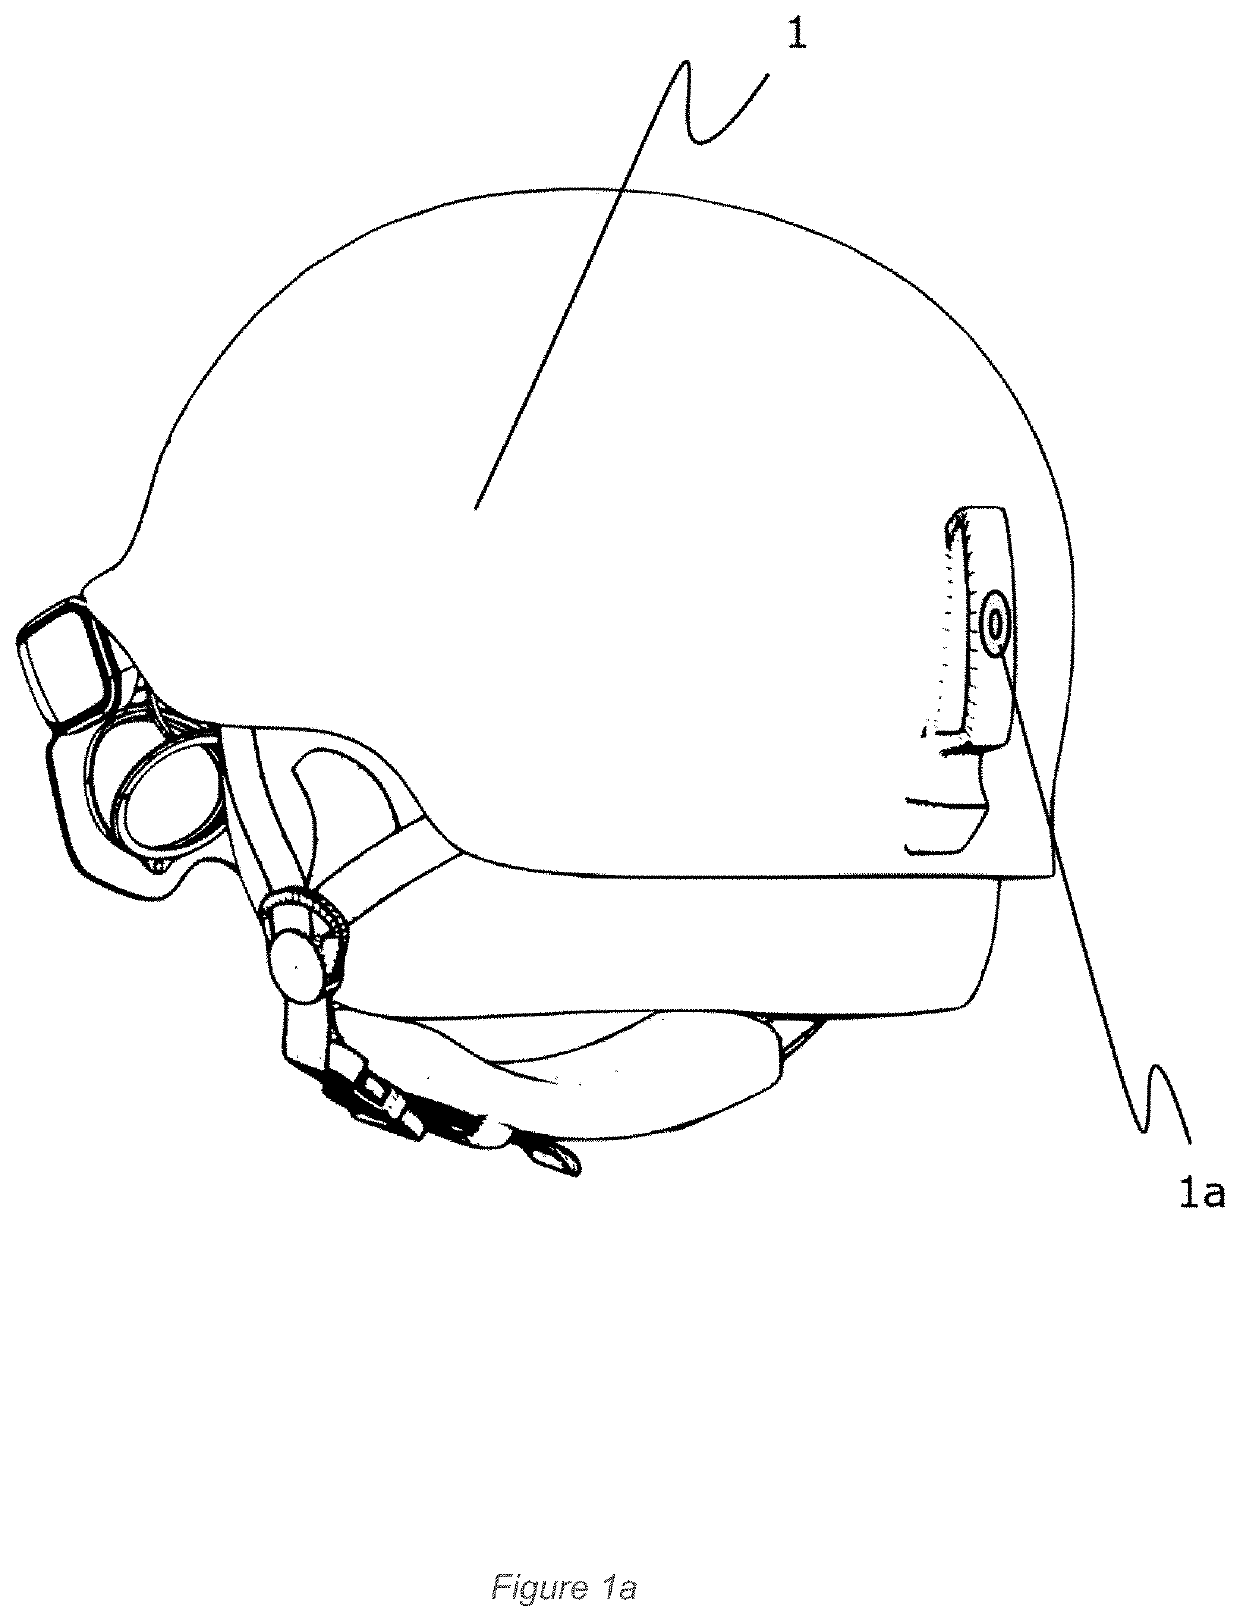 Ar/xr headset for military medical telemedicine and target acquisition